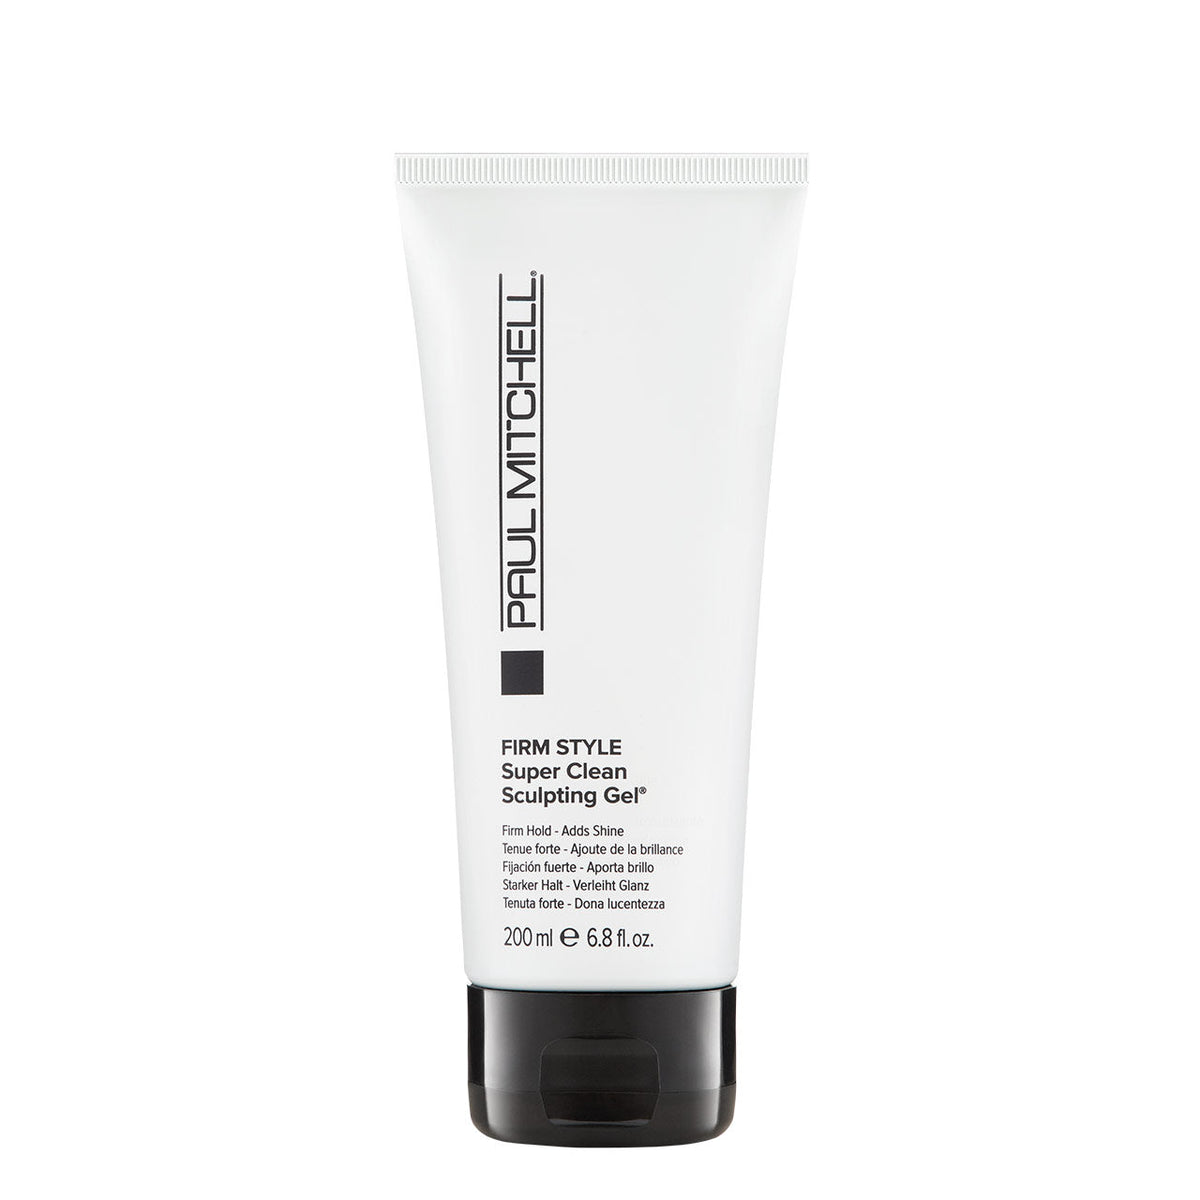 Firm Style Super Clean Sculpting Gel - by Paul Mitchell |ProCare Outlet|